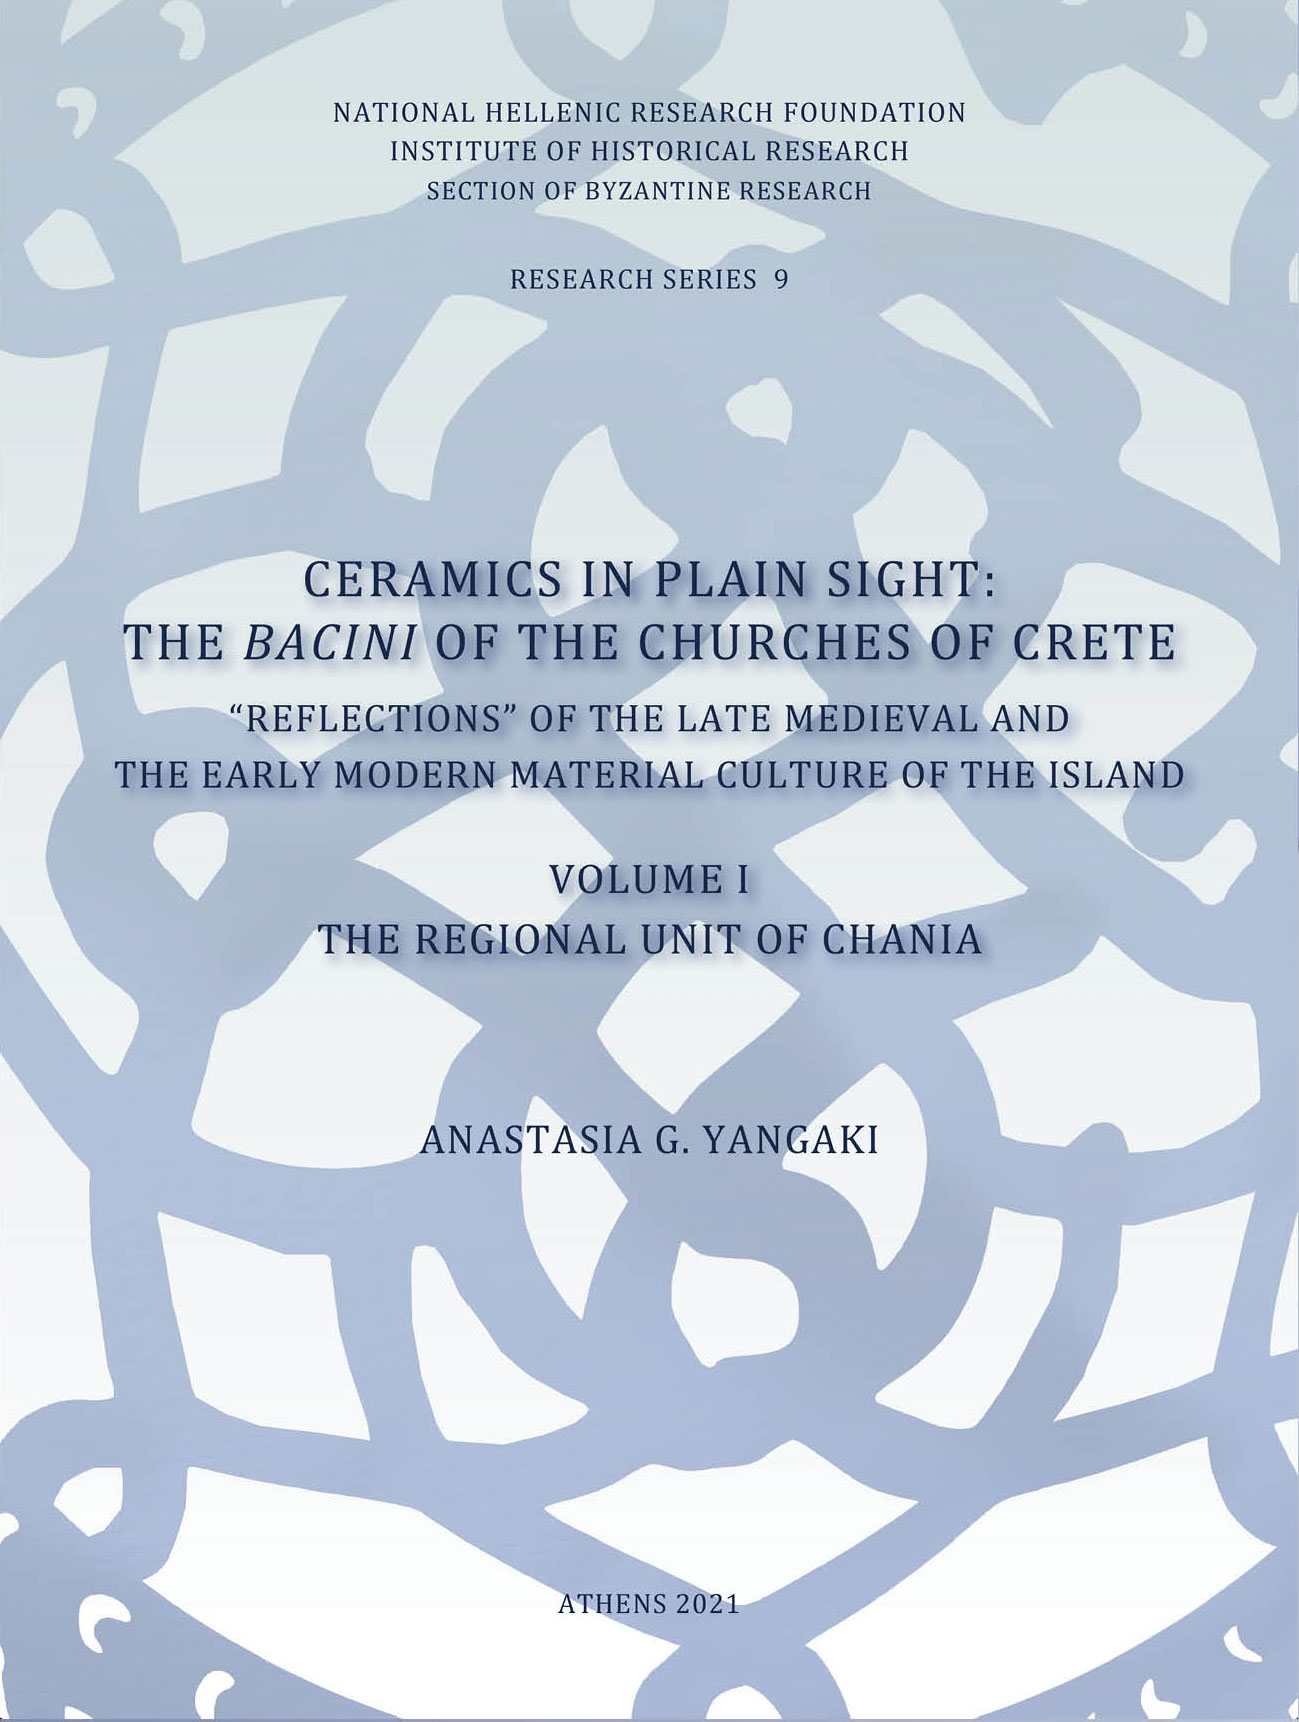 Ceramics in plain sight: The bacini of the churches of Crete, Reflections of the late mediaval and the early modern material culture of the island. Volume I. The regional unit of Chania, Γιαγκάκη, Αναστασία Γ., Εθνικό Ίδρυμα Ερευνών (Ε.Ι.Ε.). Ινστιτούτο Ιστορικών Ερευνών, 2021